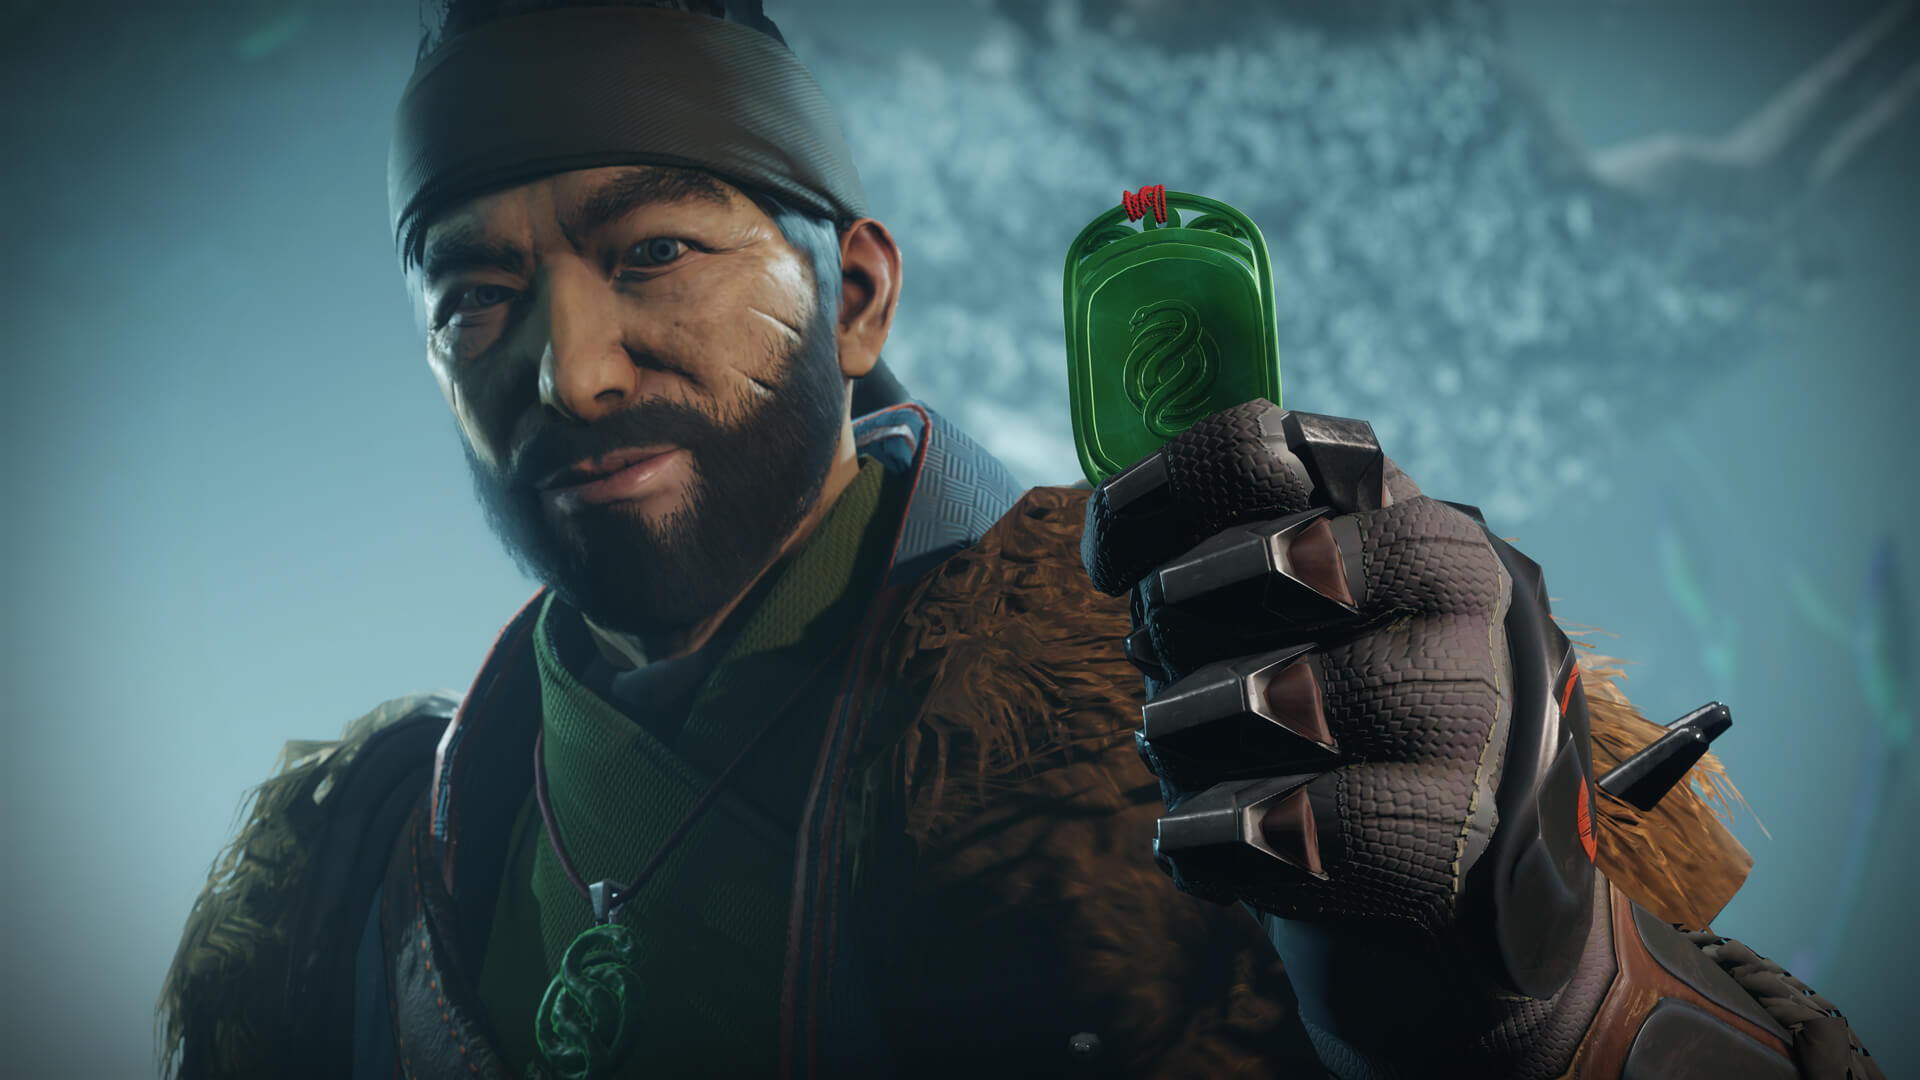 The Drifter is a new vendor for the Gambit game mode, and is sure to have a story behind him